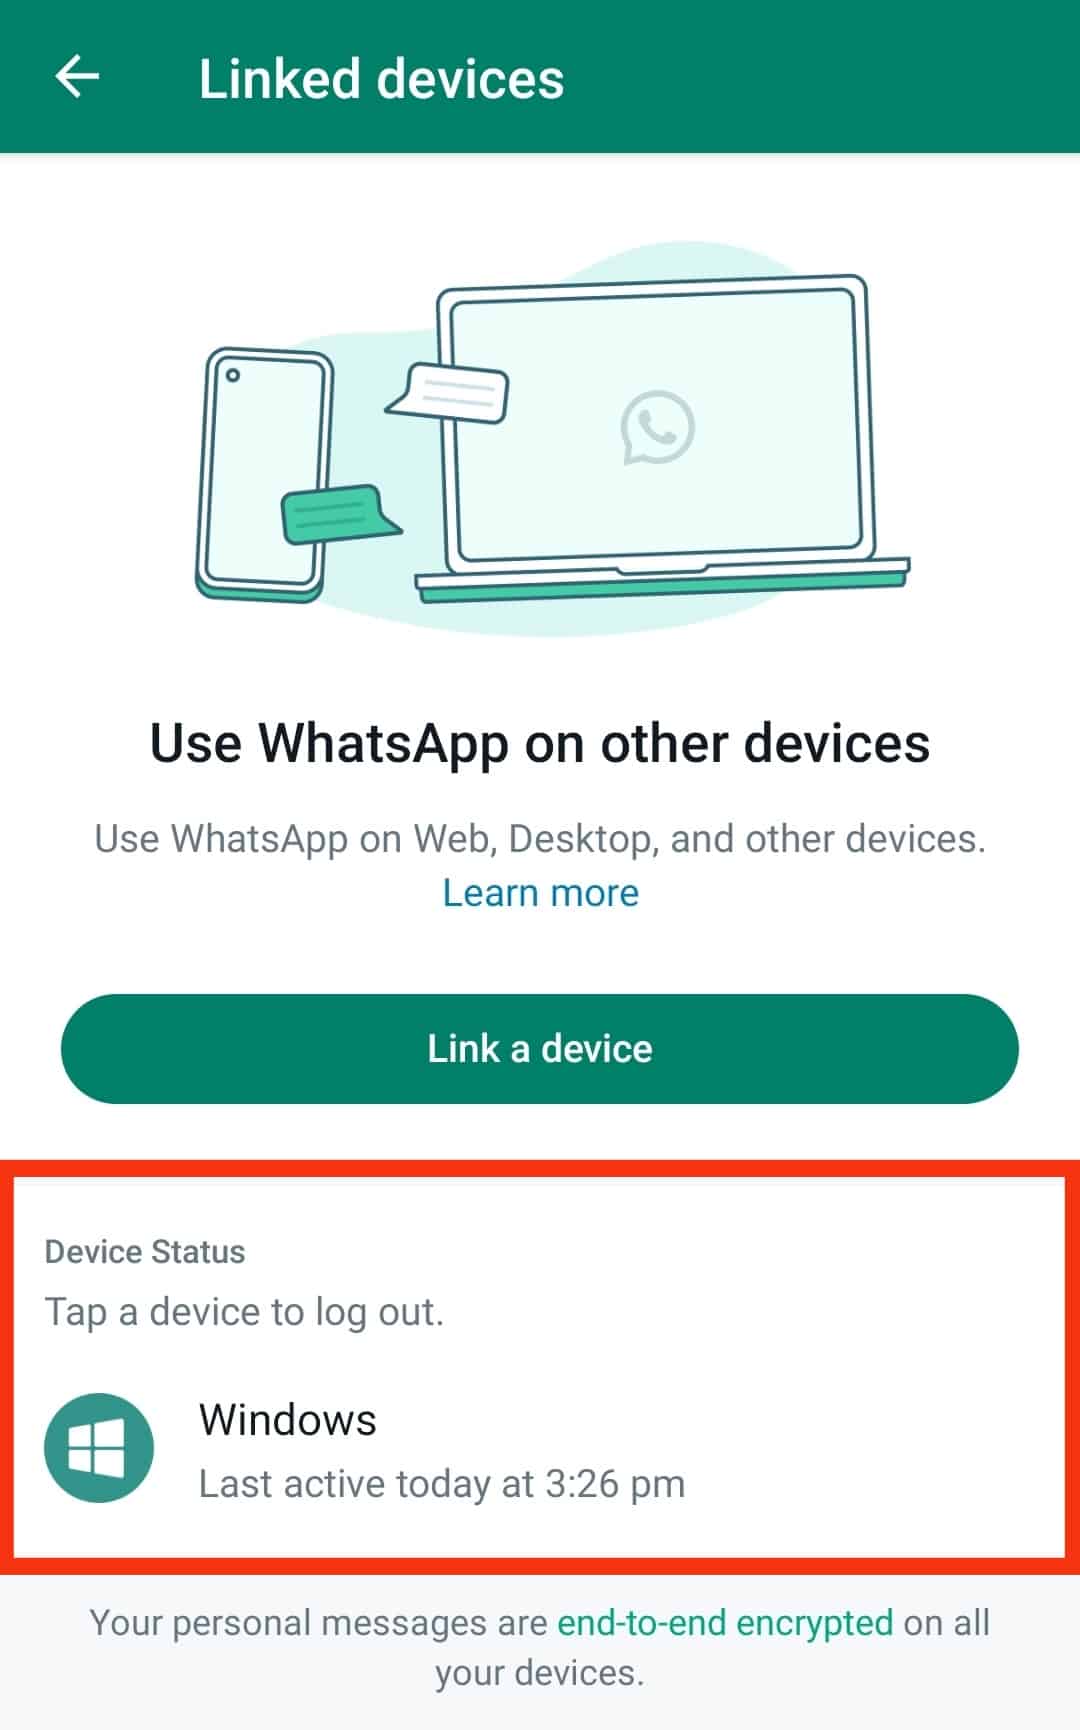 Move To The Device Status Section